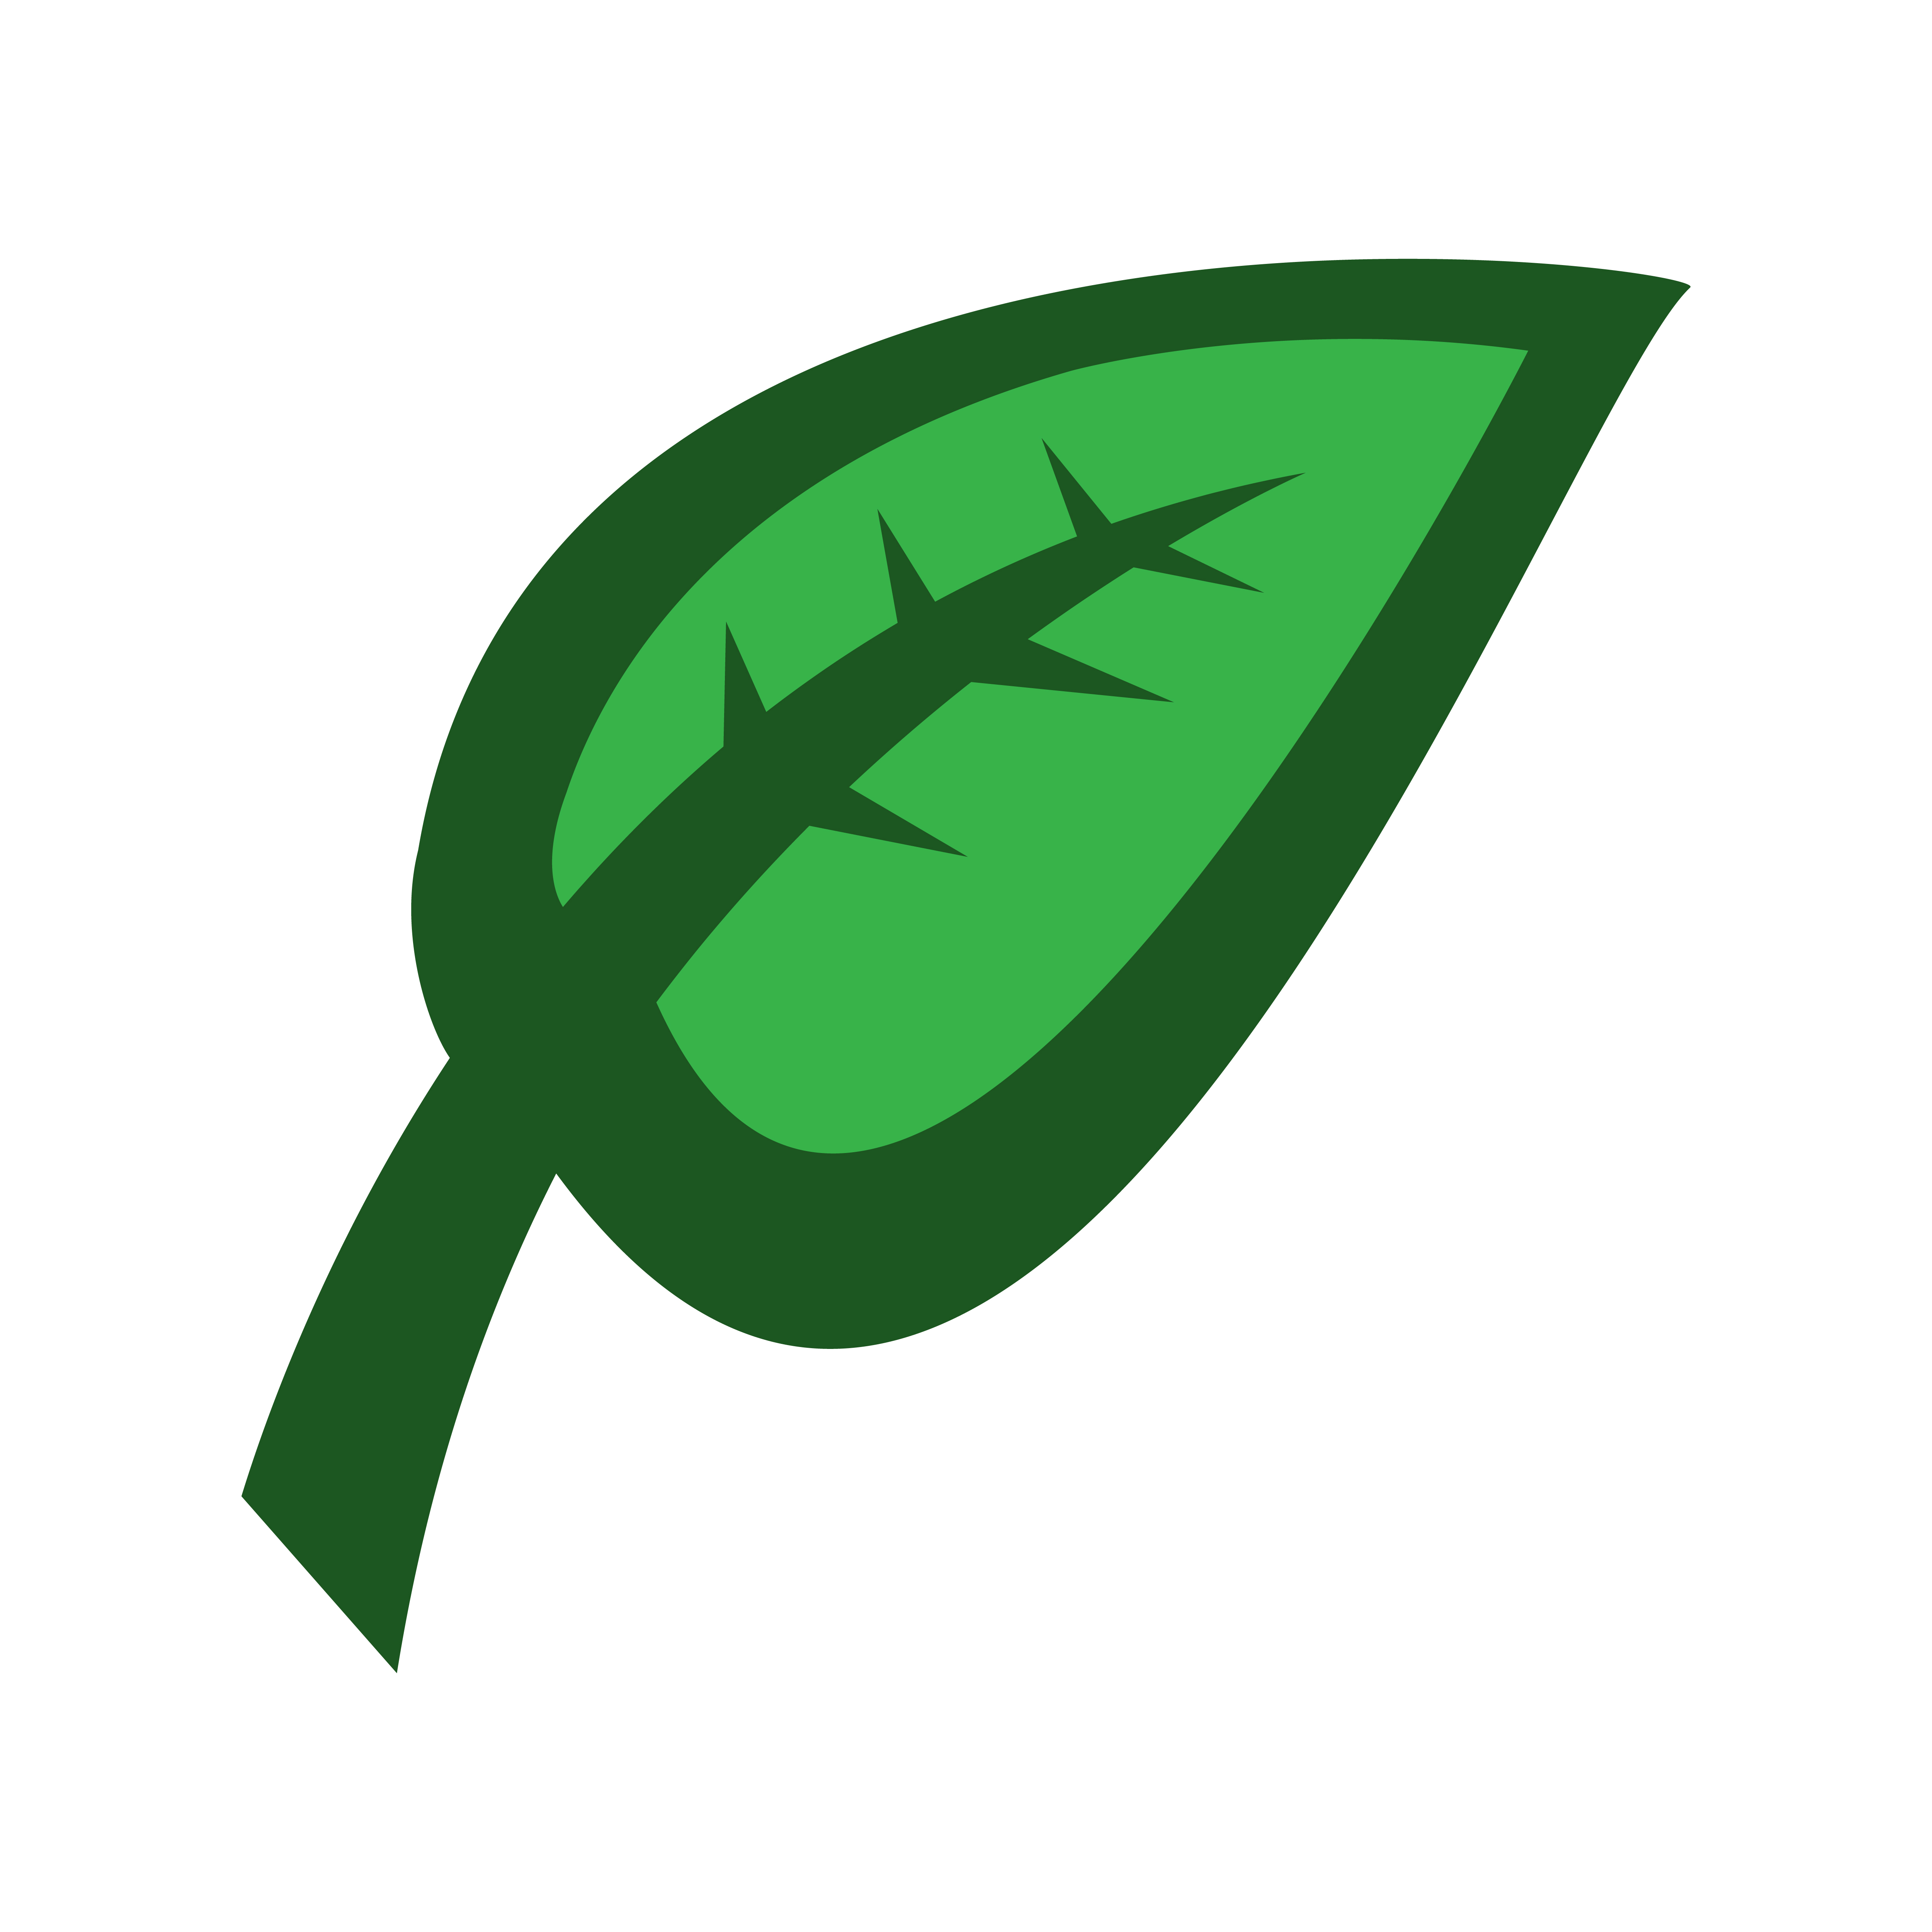 Green leaf icon simple style Royalty Free Vector Image